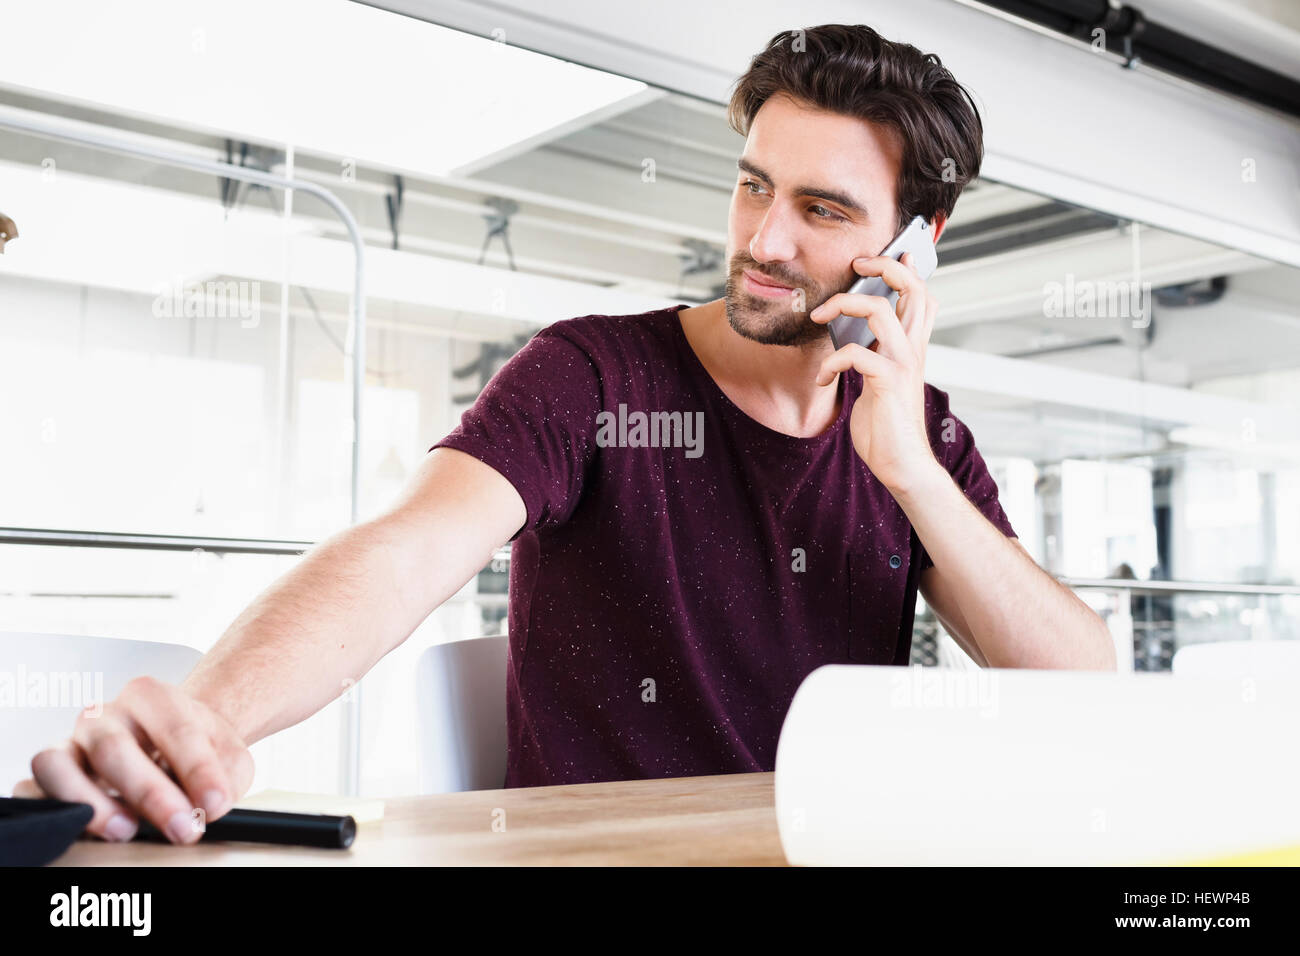 Man in office using mobile phone, looking away Banque D'Images